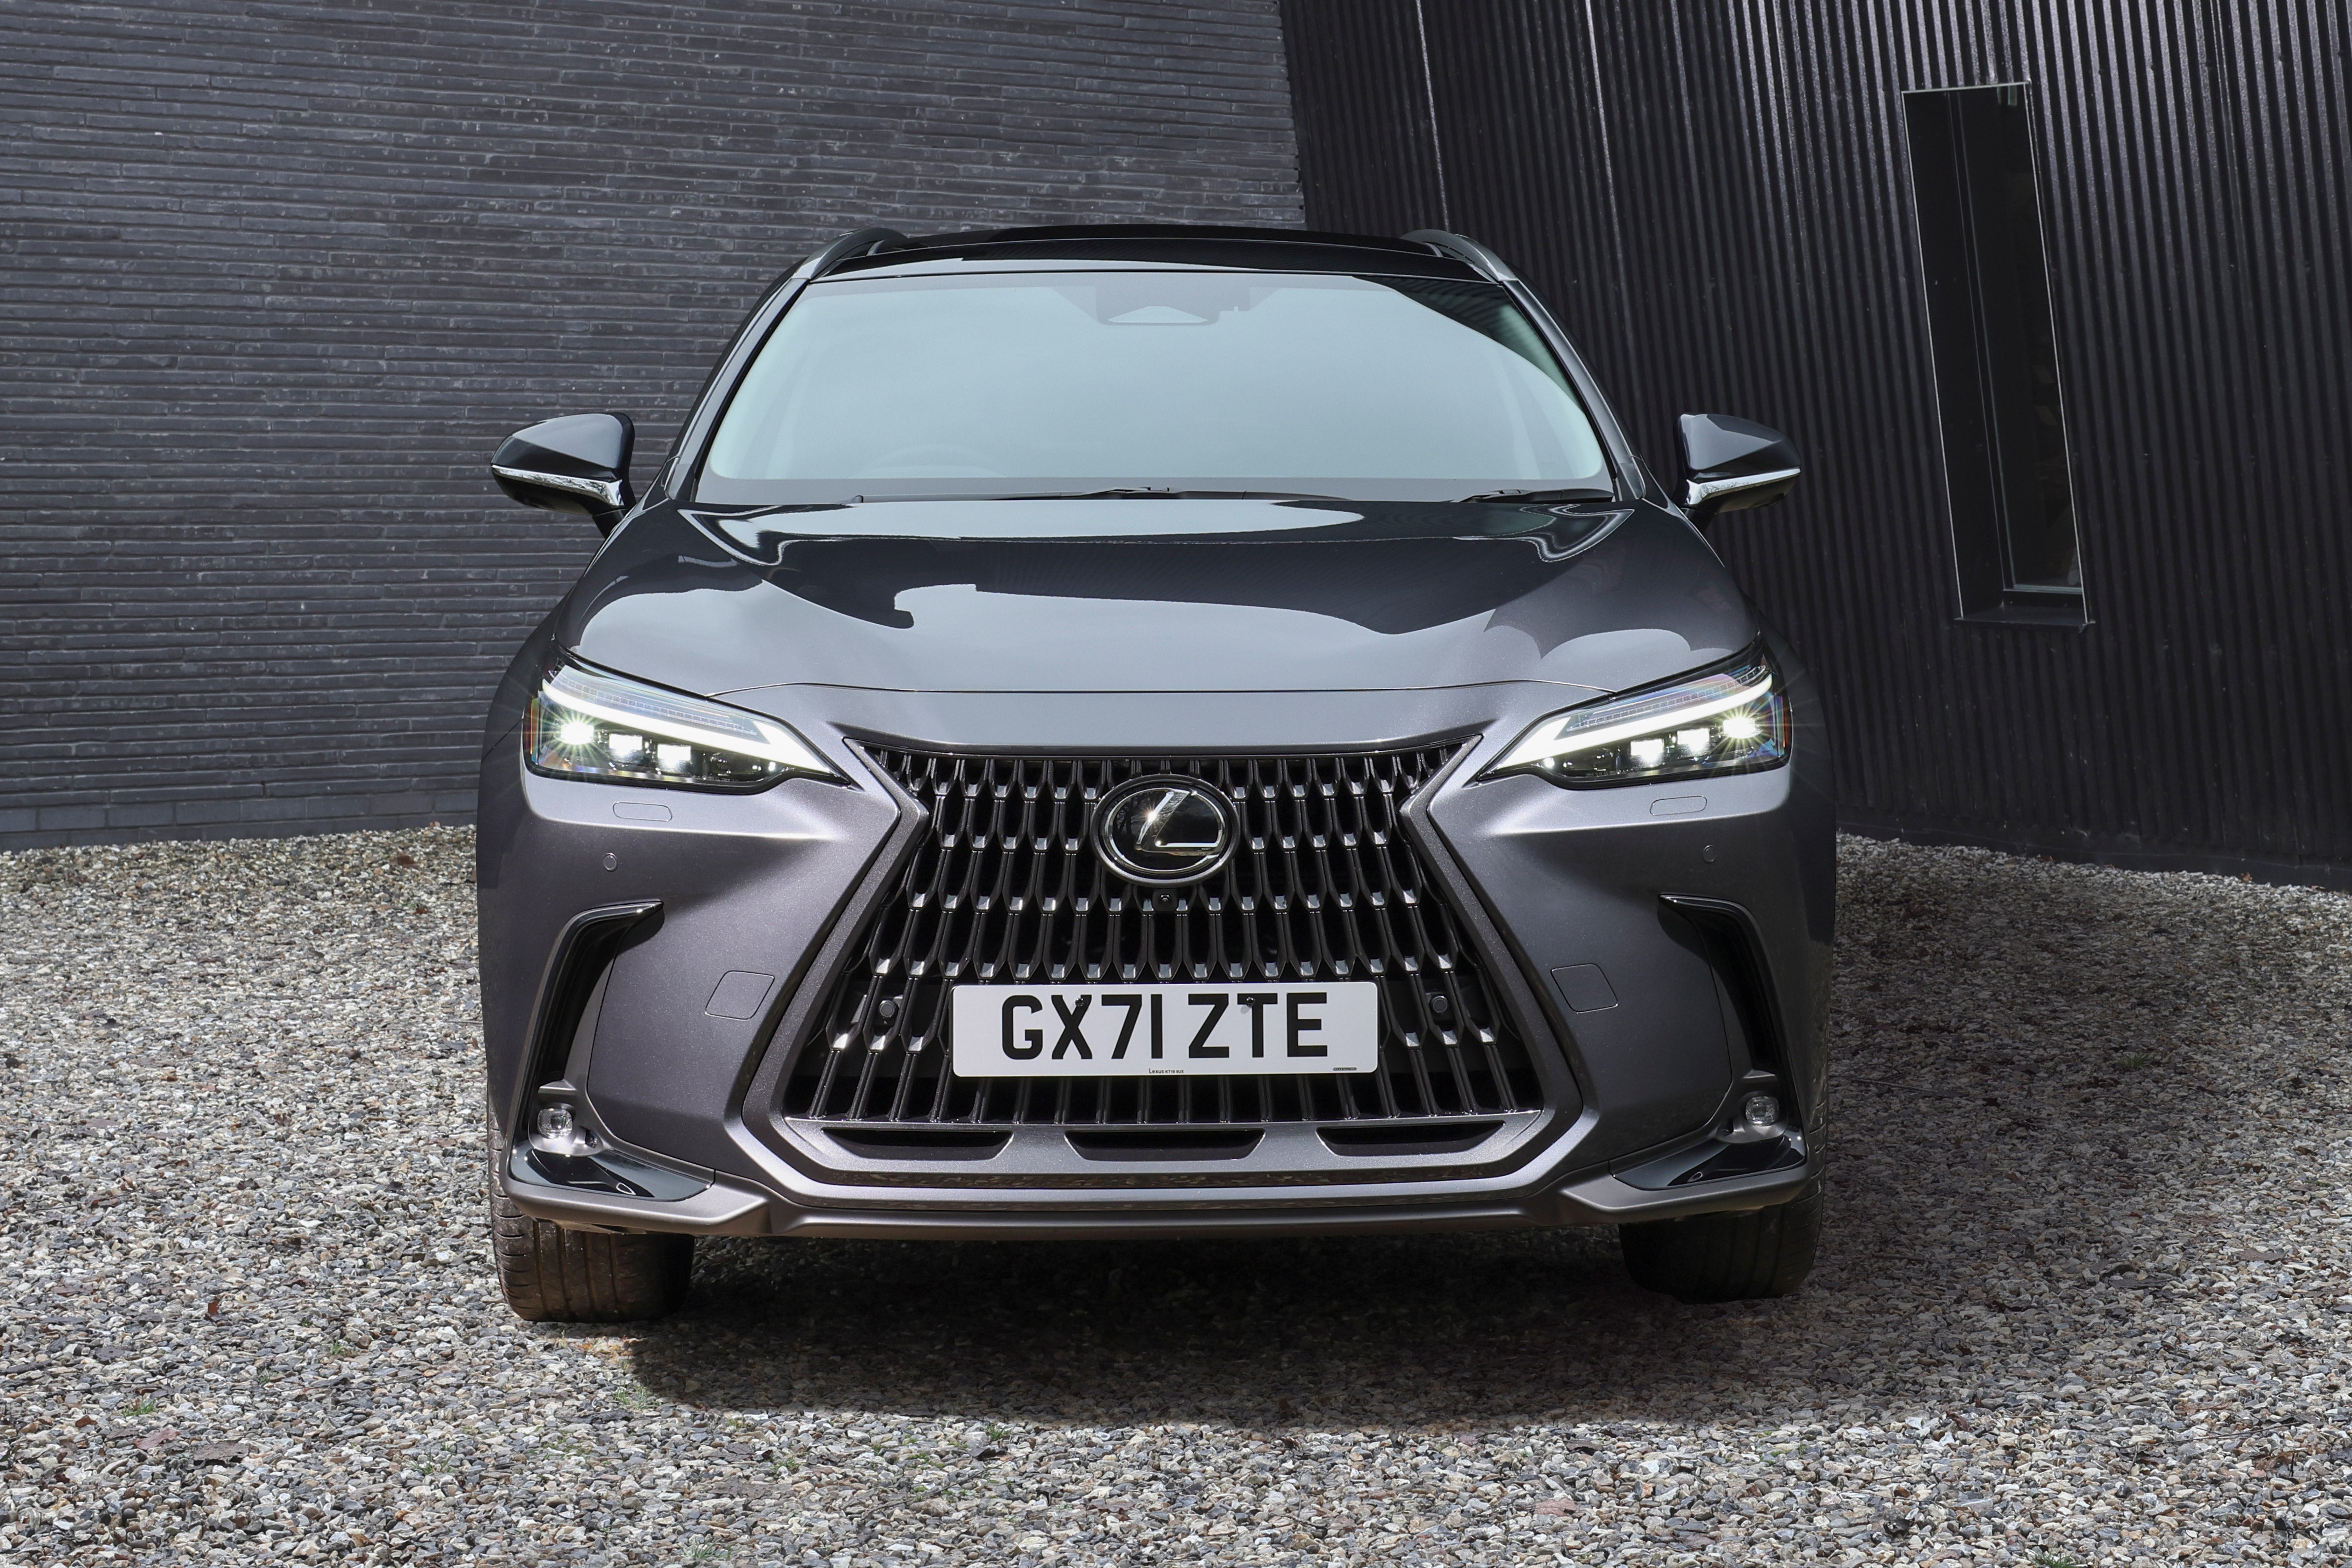 The NX 350h pairs a 2.5-litre petrol engine with an electric motor to produce 244PS